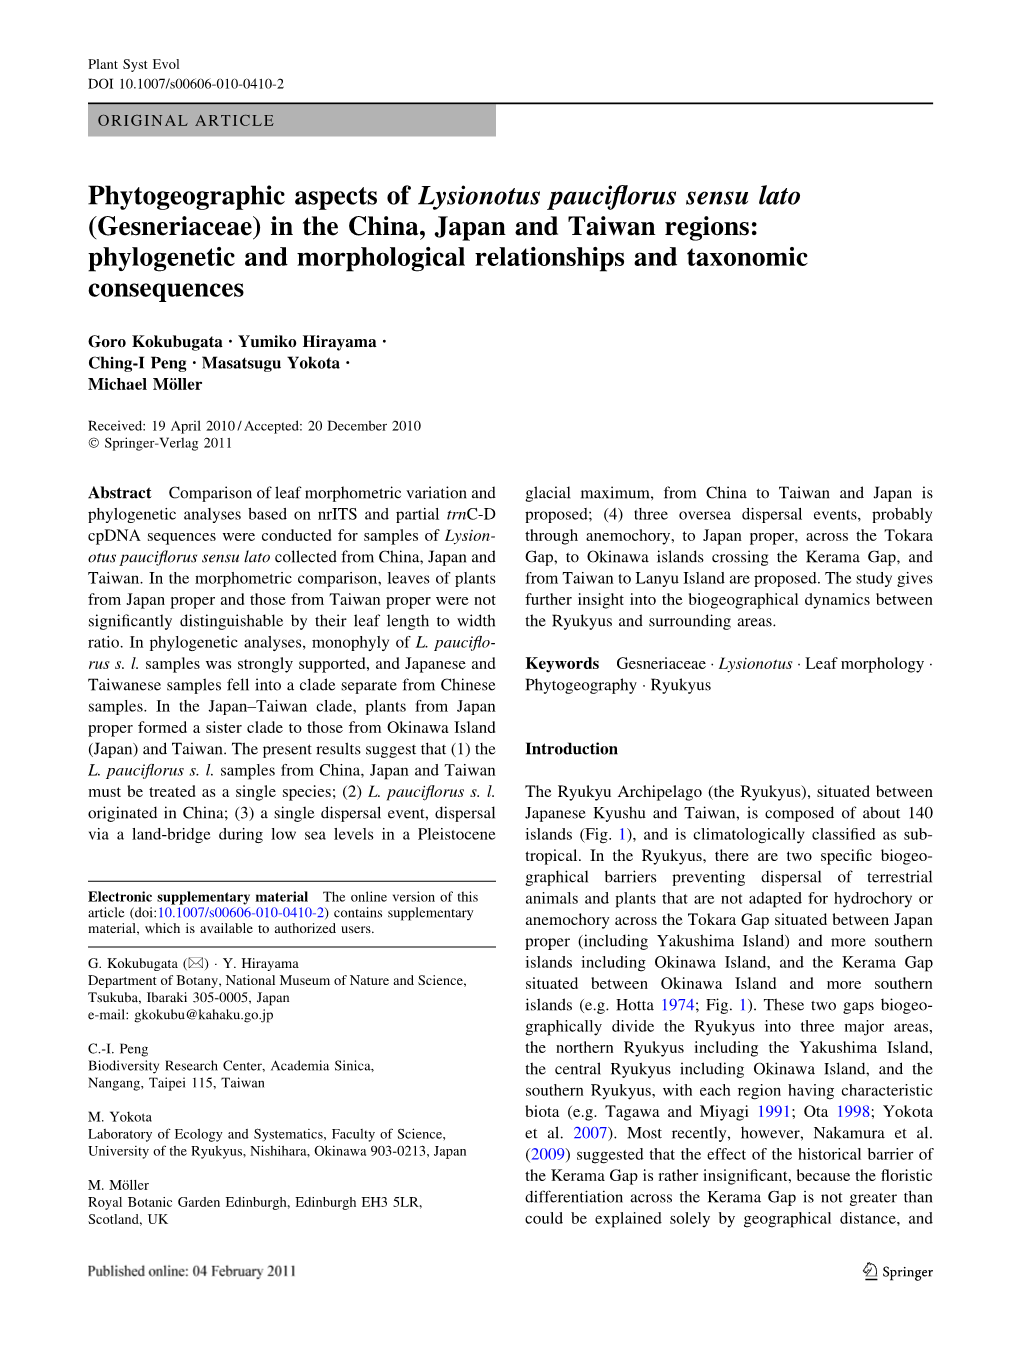 Phytogeographic Aspects of Lysionotus Pauciflorus Sensu Lato (Gesneriaceae) in the China, Japan and Taiwan Regions: Phylogenetic